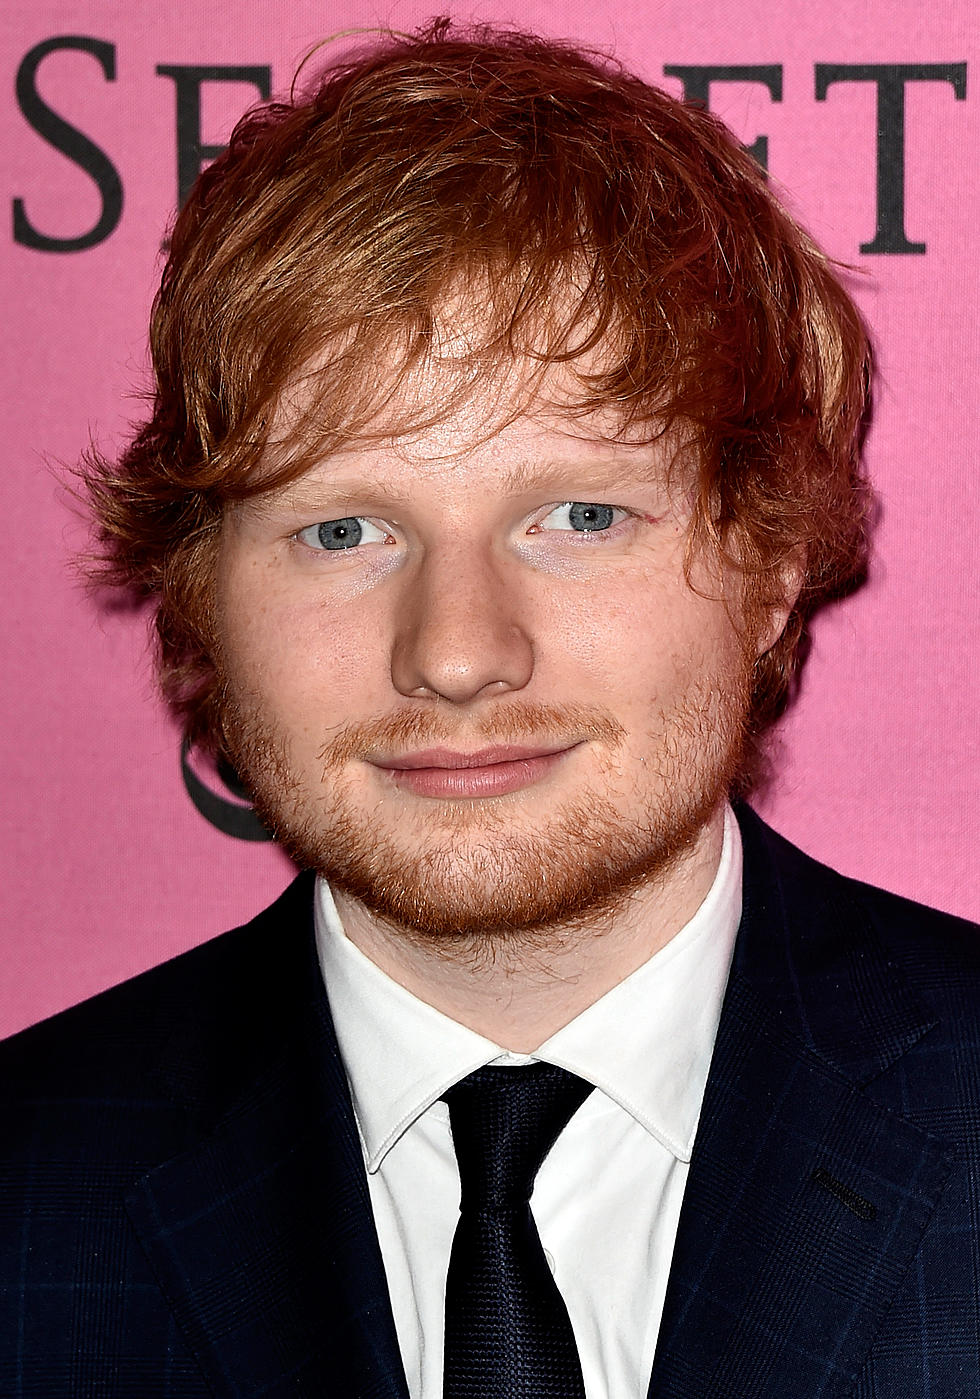 Cover Song Friday – Ed Sheeran Covers ‘Trap Queen’ by Fetty Wap